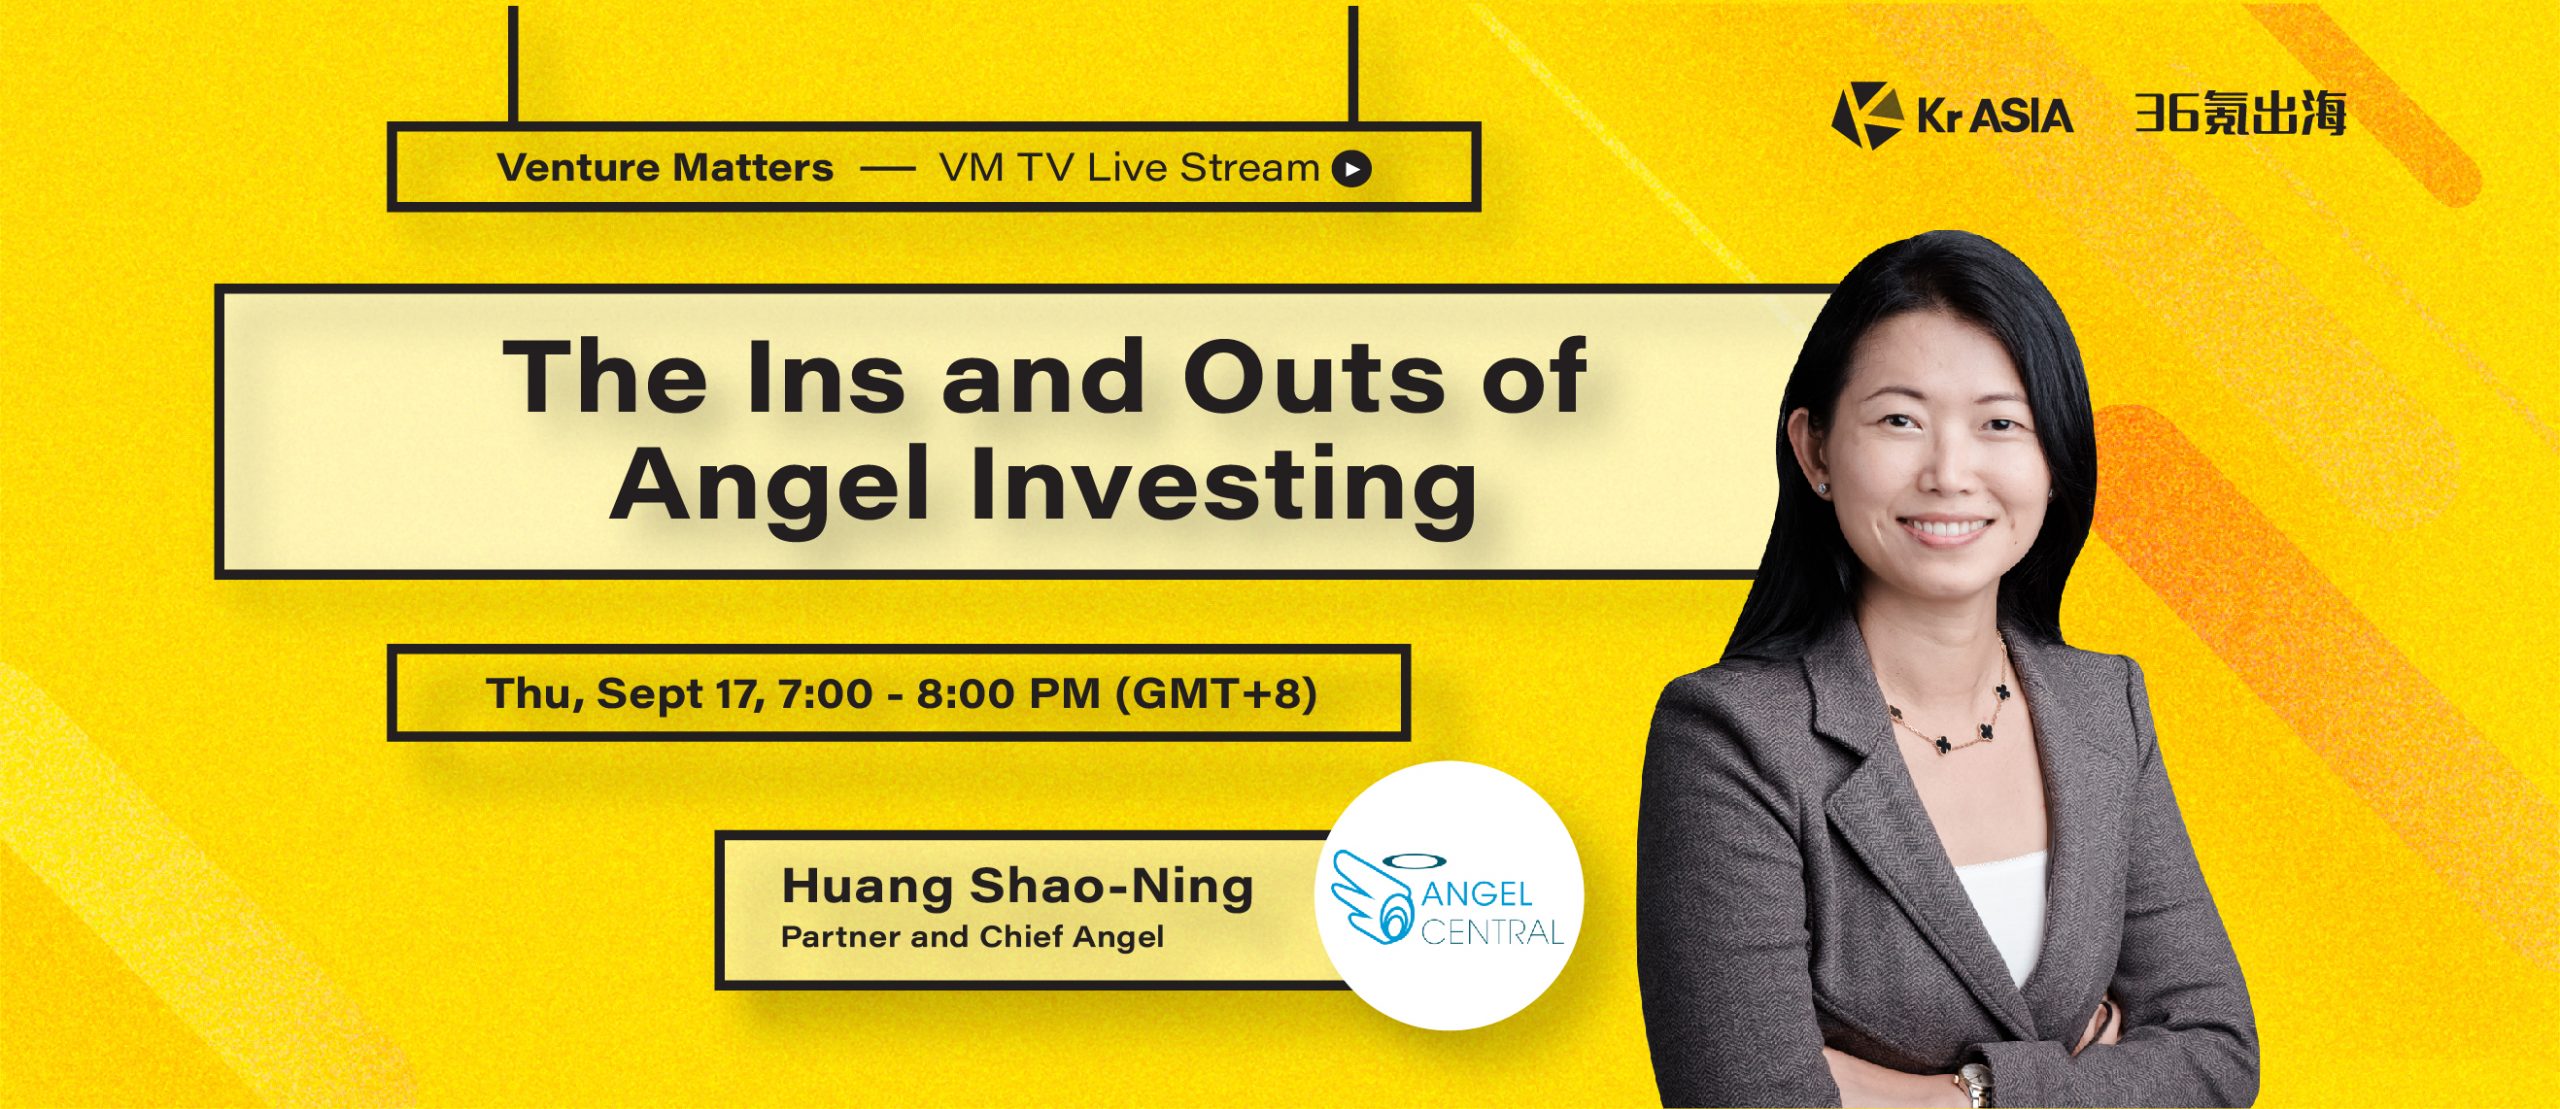 VMTV #7: Huang Shao Ning, partner and chief angel at AngelCentral, shares the ins and outs of angel investment